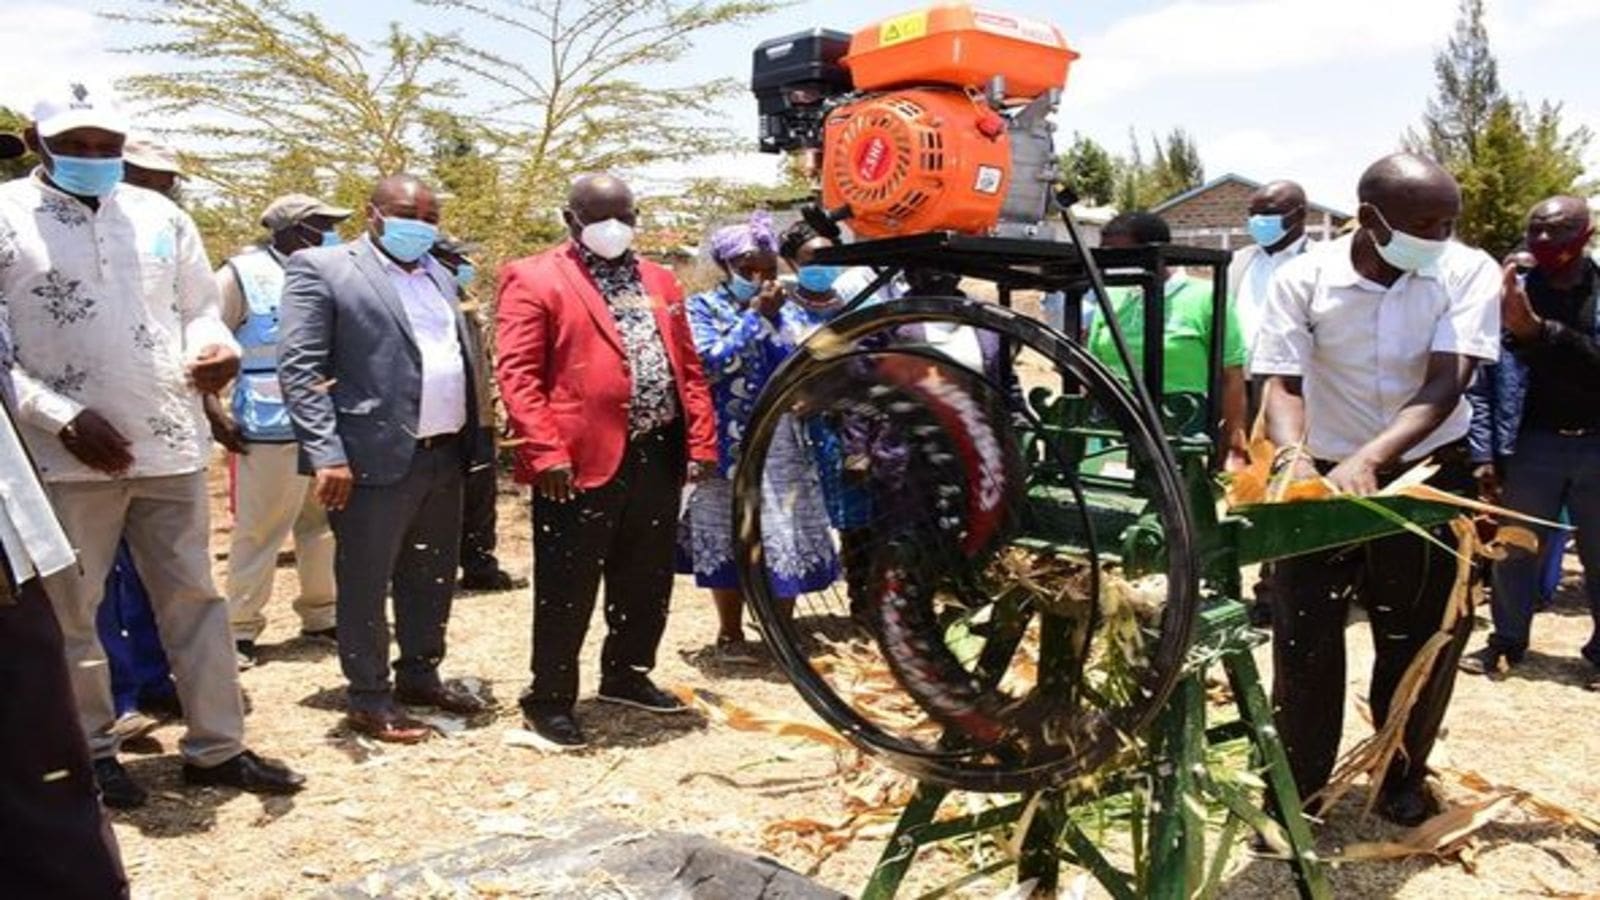 Dairy farmers in Kenya’s Nyeri county profit from machine donation